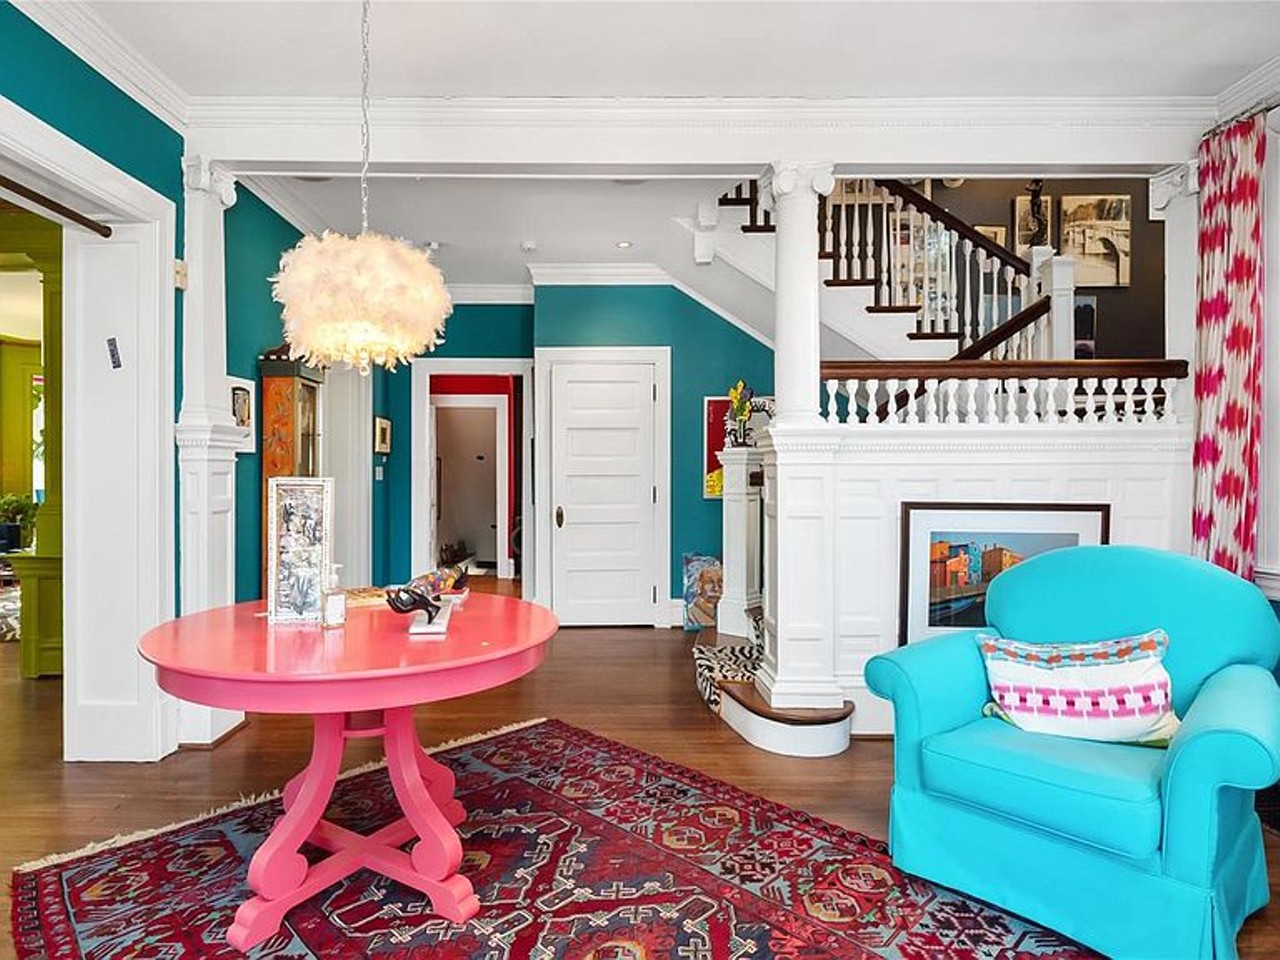 This St. Louis House Is a Big Hit on 'Zillow Gone Wild' [PHOTOS]